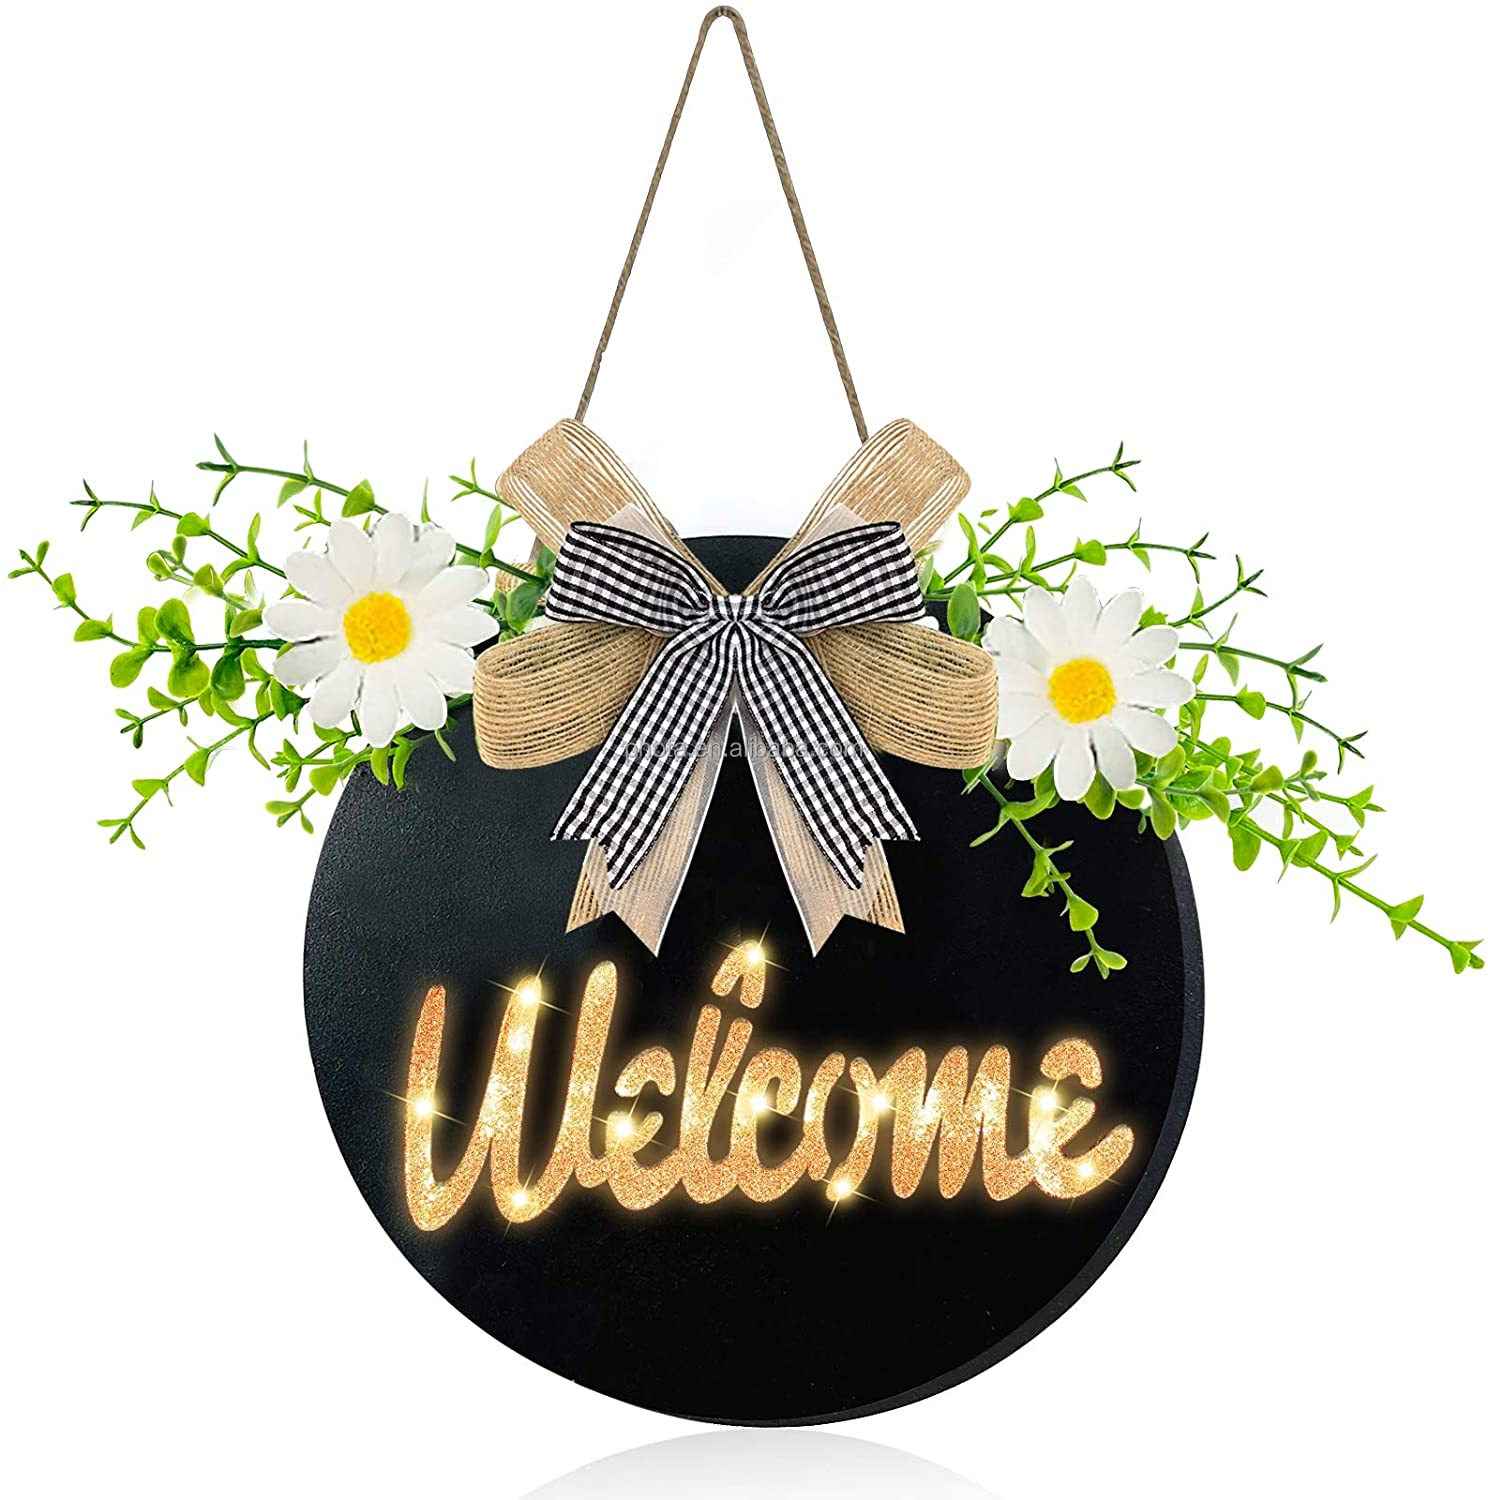 Door Decor Welcome sign for house Welcome Wreath Sign with Timer for Front Door Porch Decor Hanging Round Wooden Sign